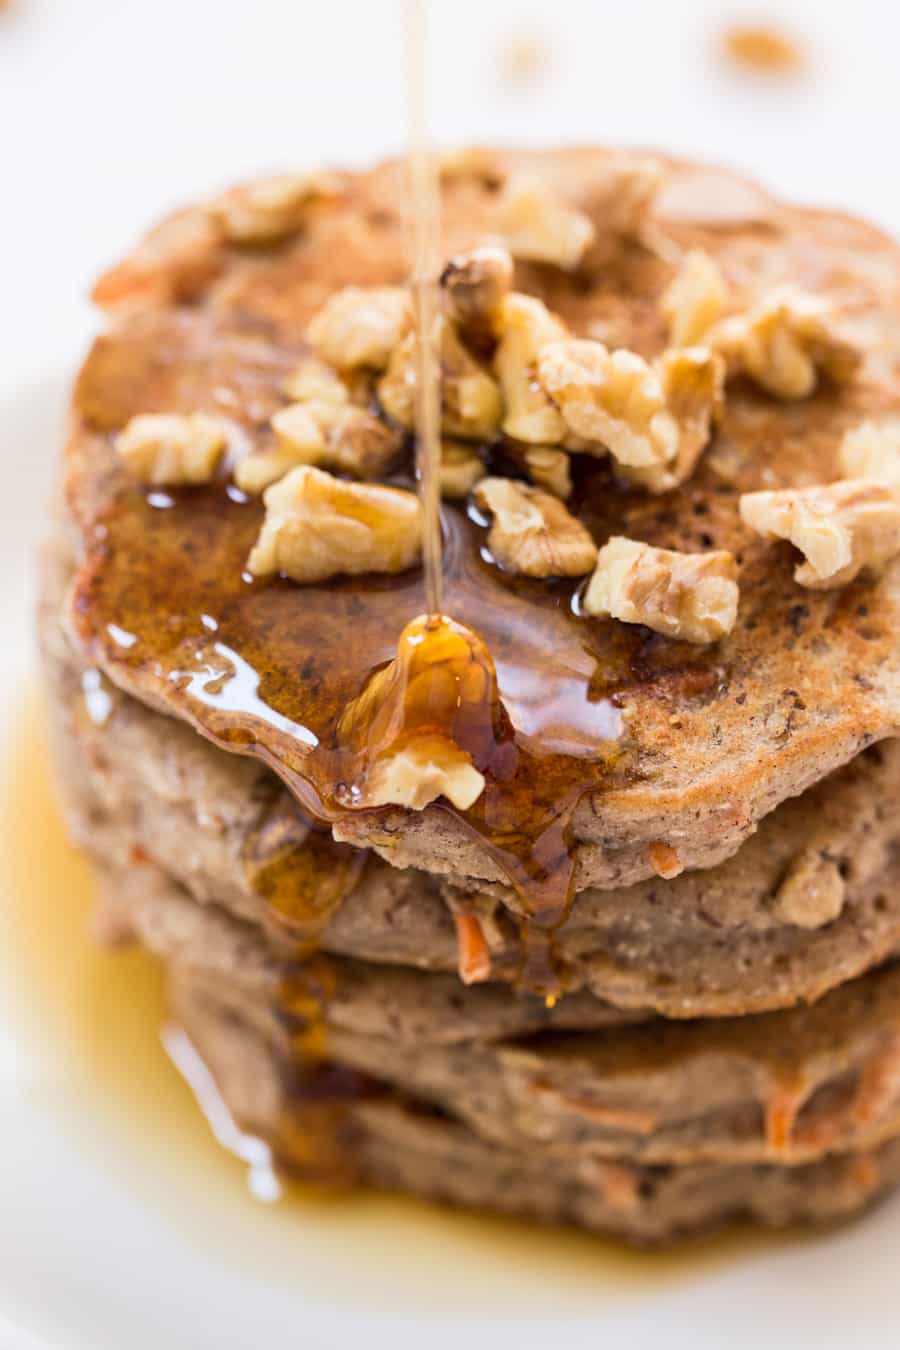 These HEALTHY Carrot Cake Pancakes are light, fluffy, but still hearty and filling!